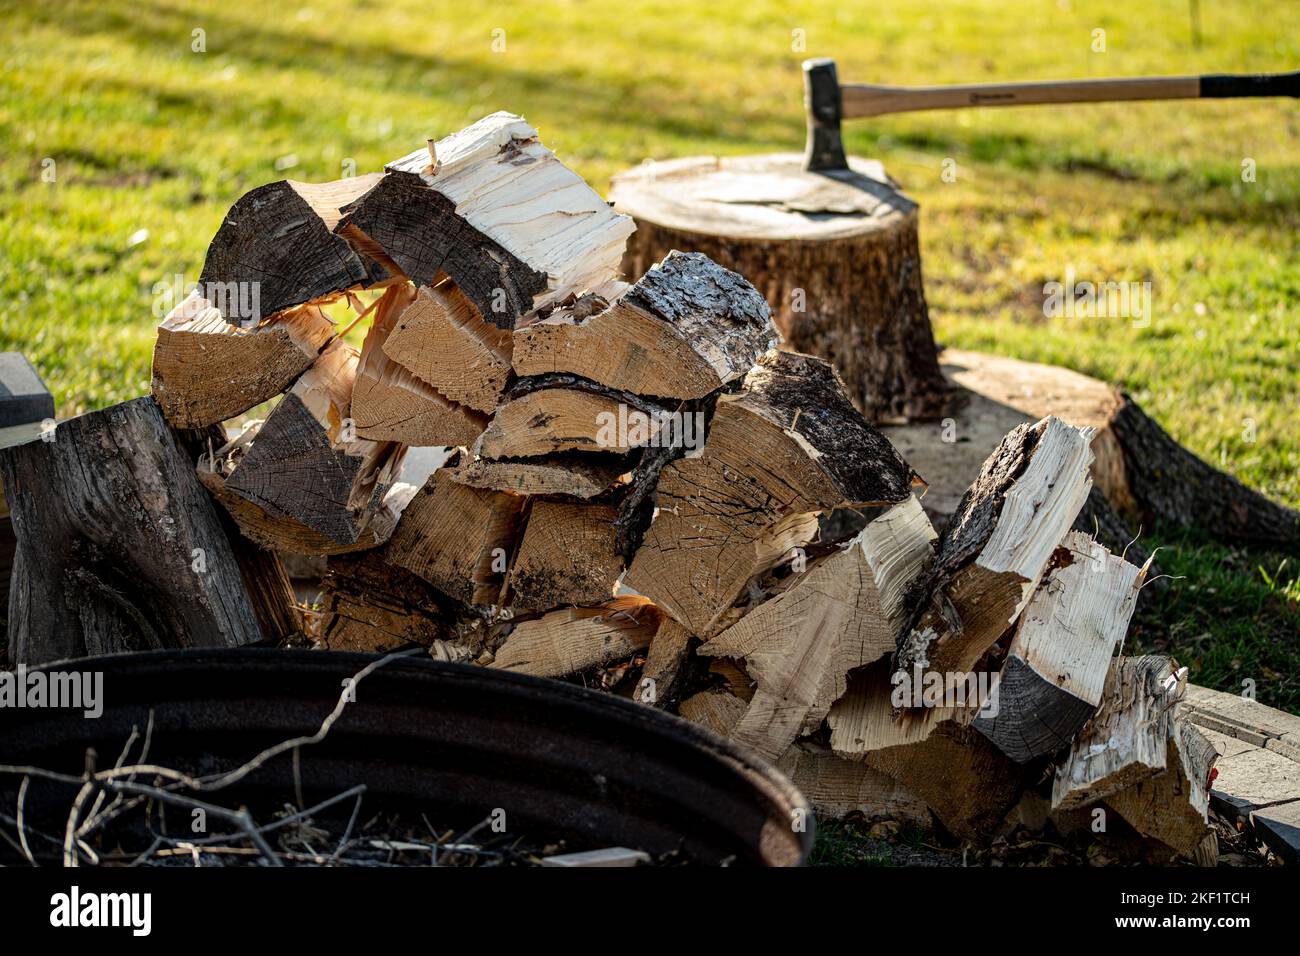 A split firewood with maul fire ring splitting wood Stock Photo